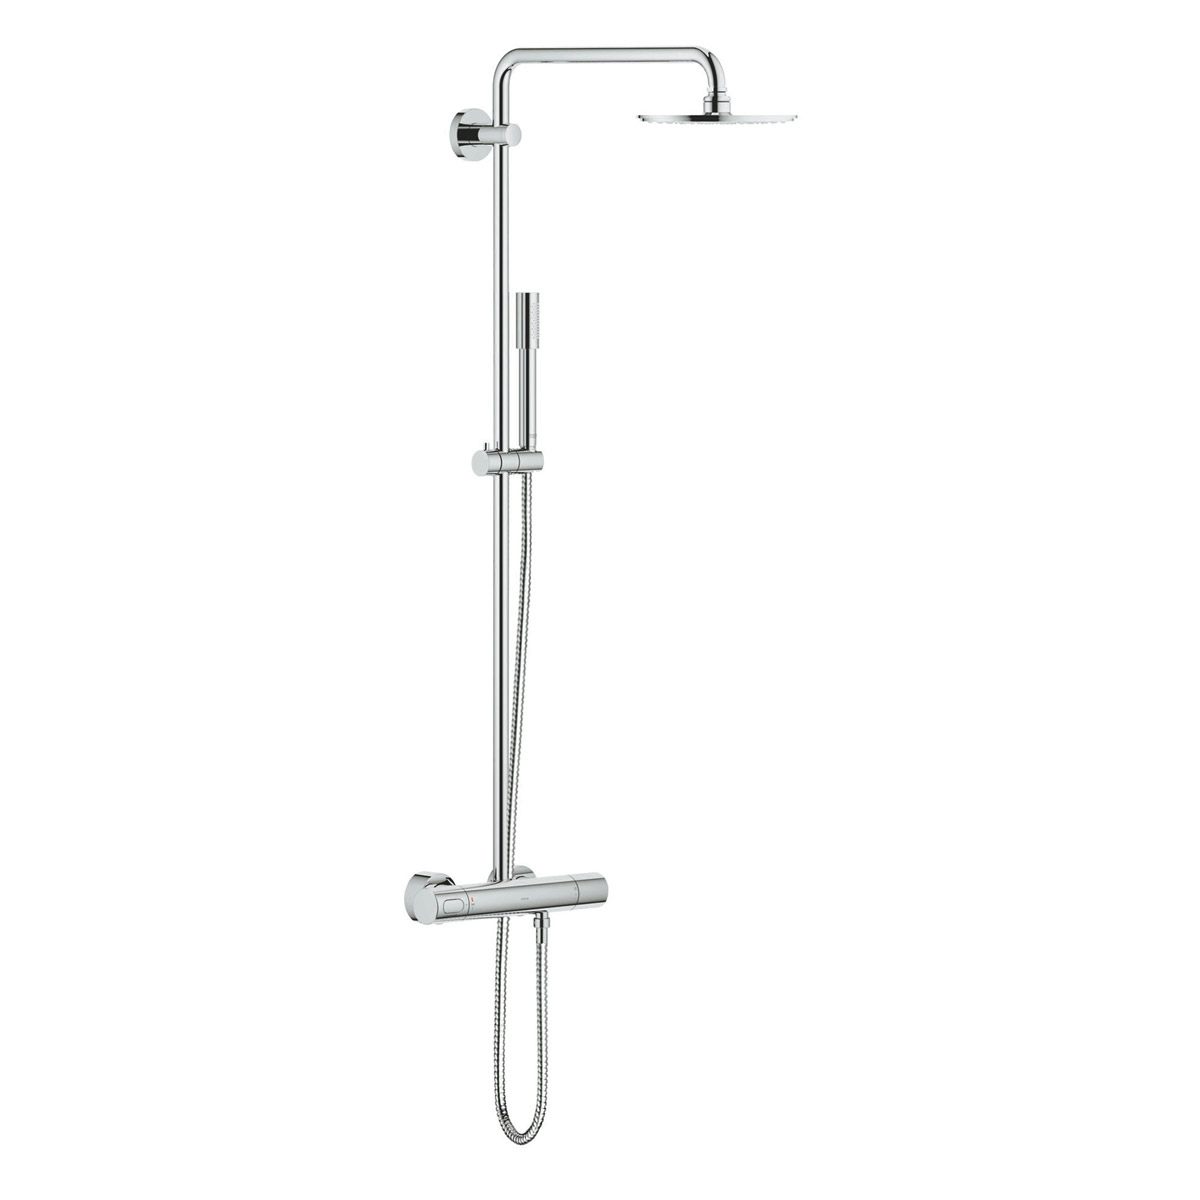 Grohe Rainshower 210 shower system with square handset